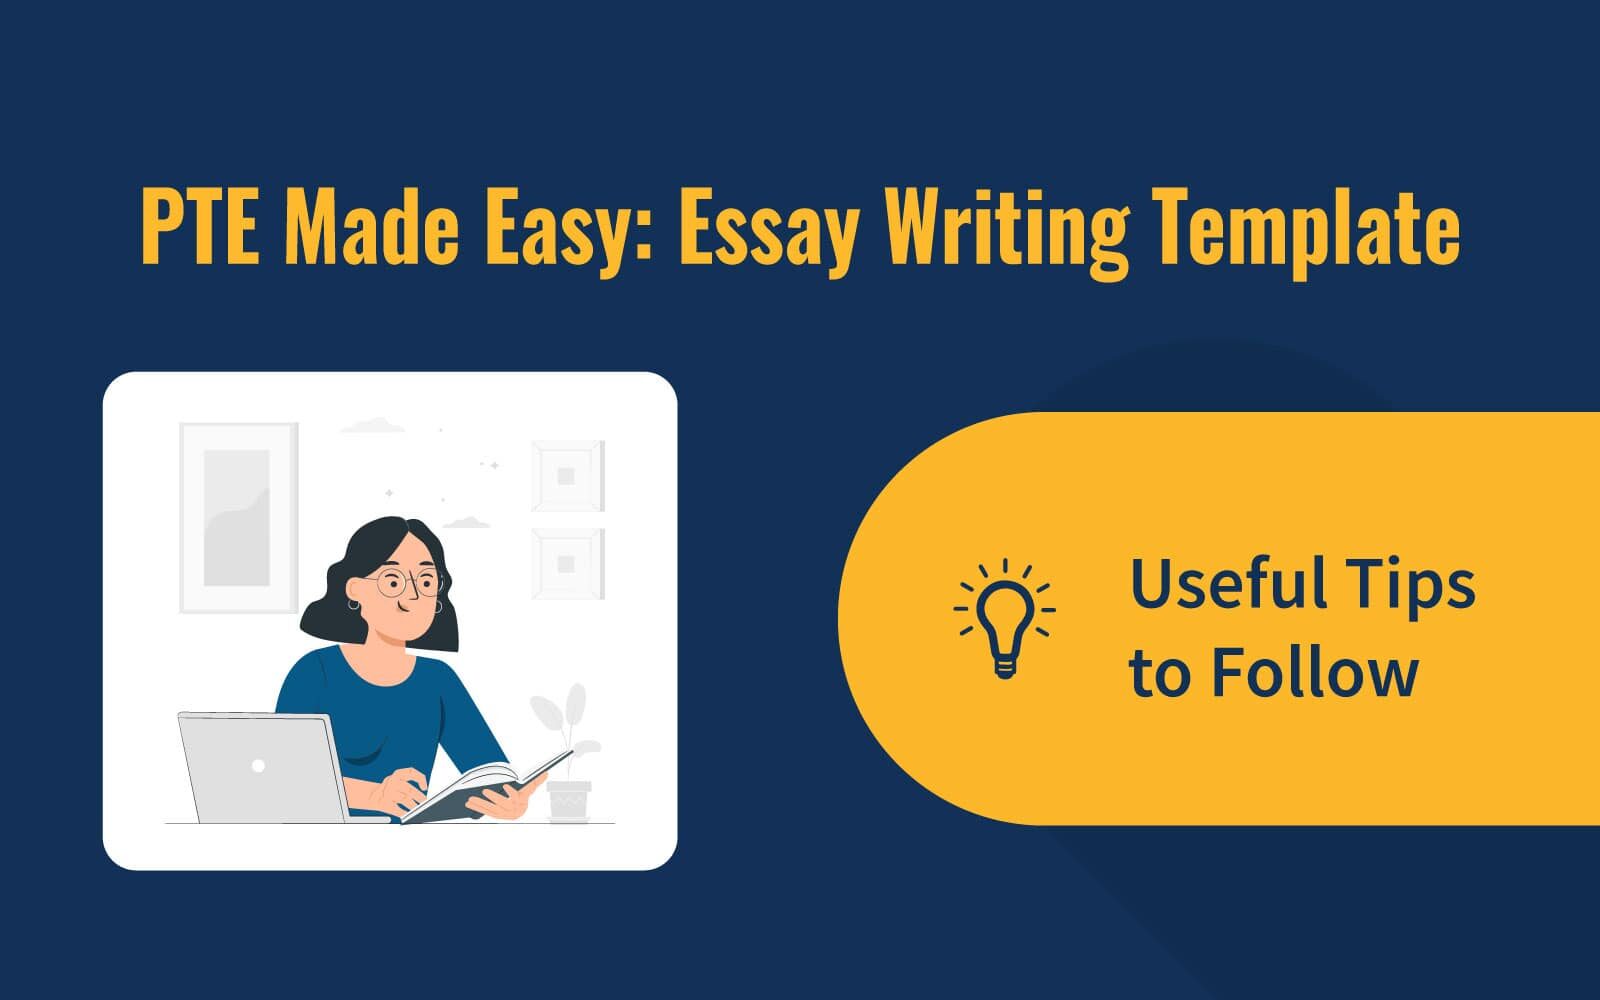 PTE Made Easy: Essay Writing Template